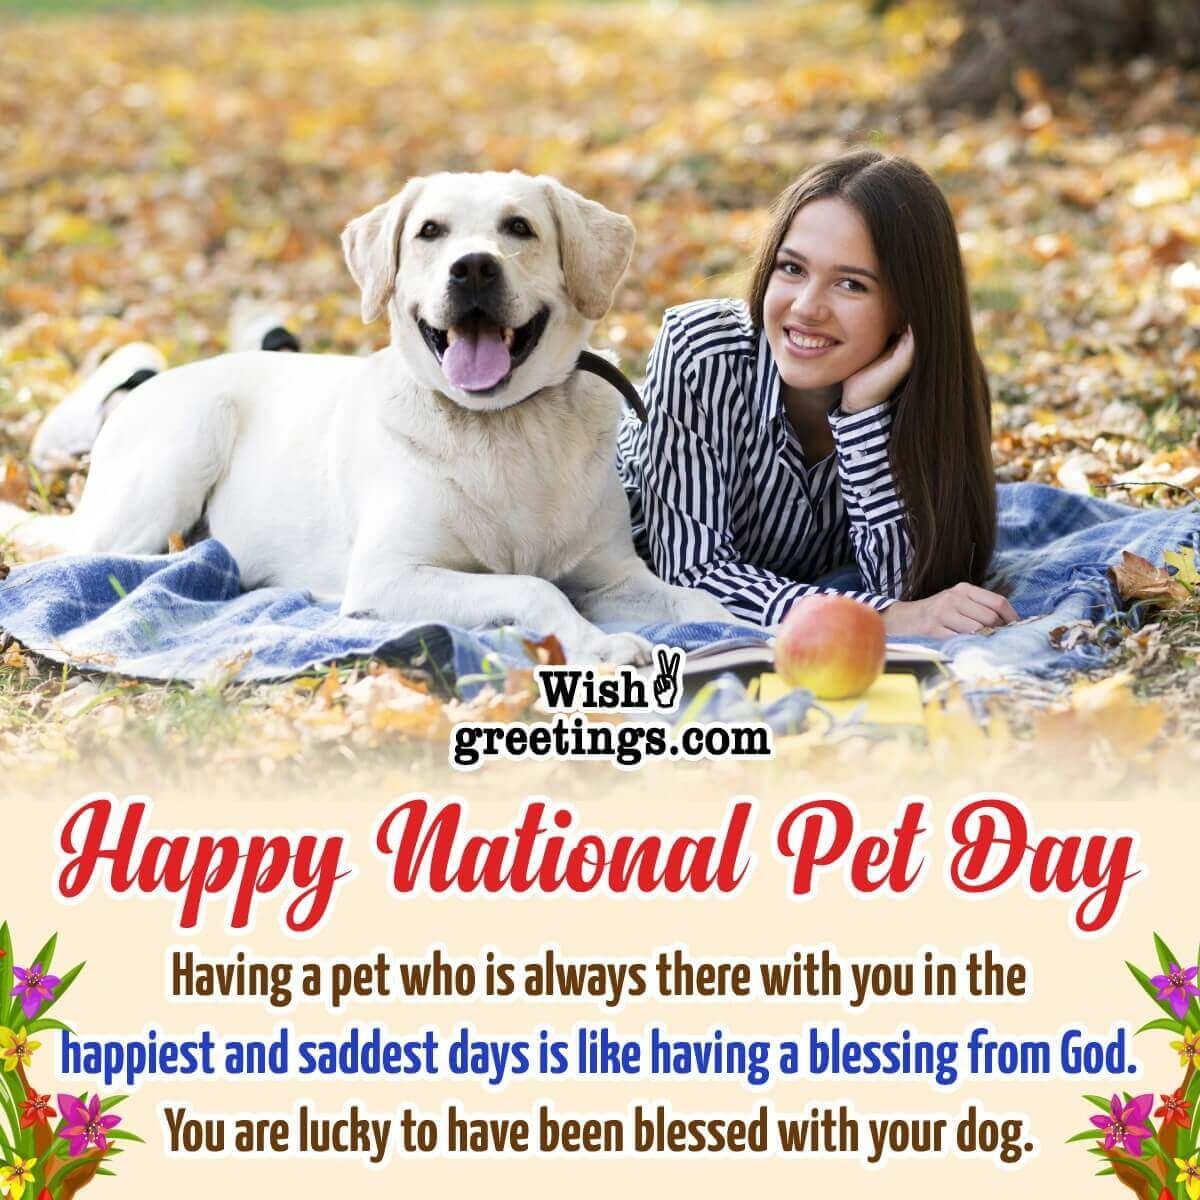 National Pet Day Messages and Wishes